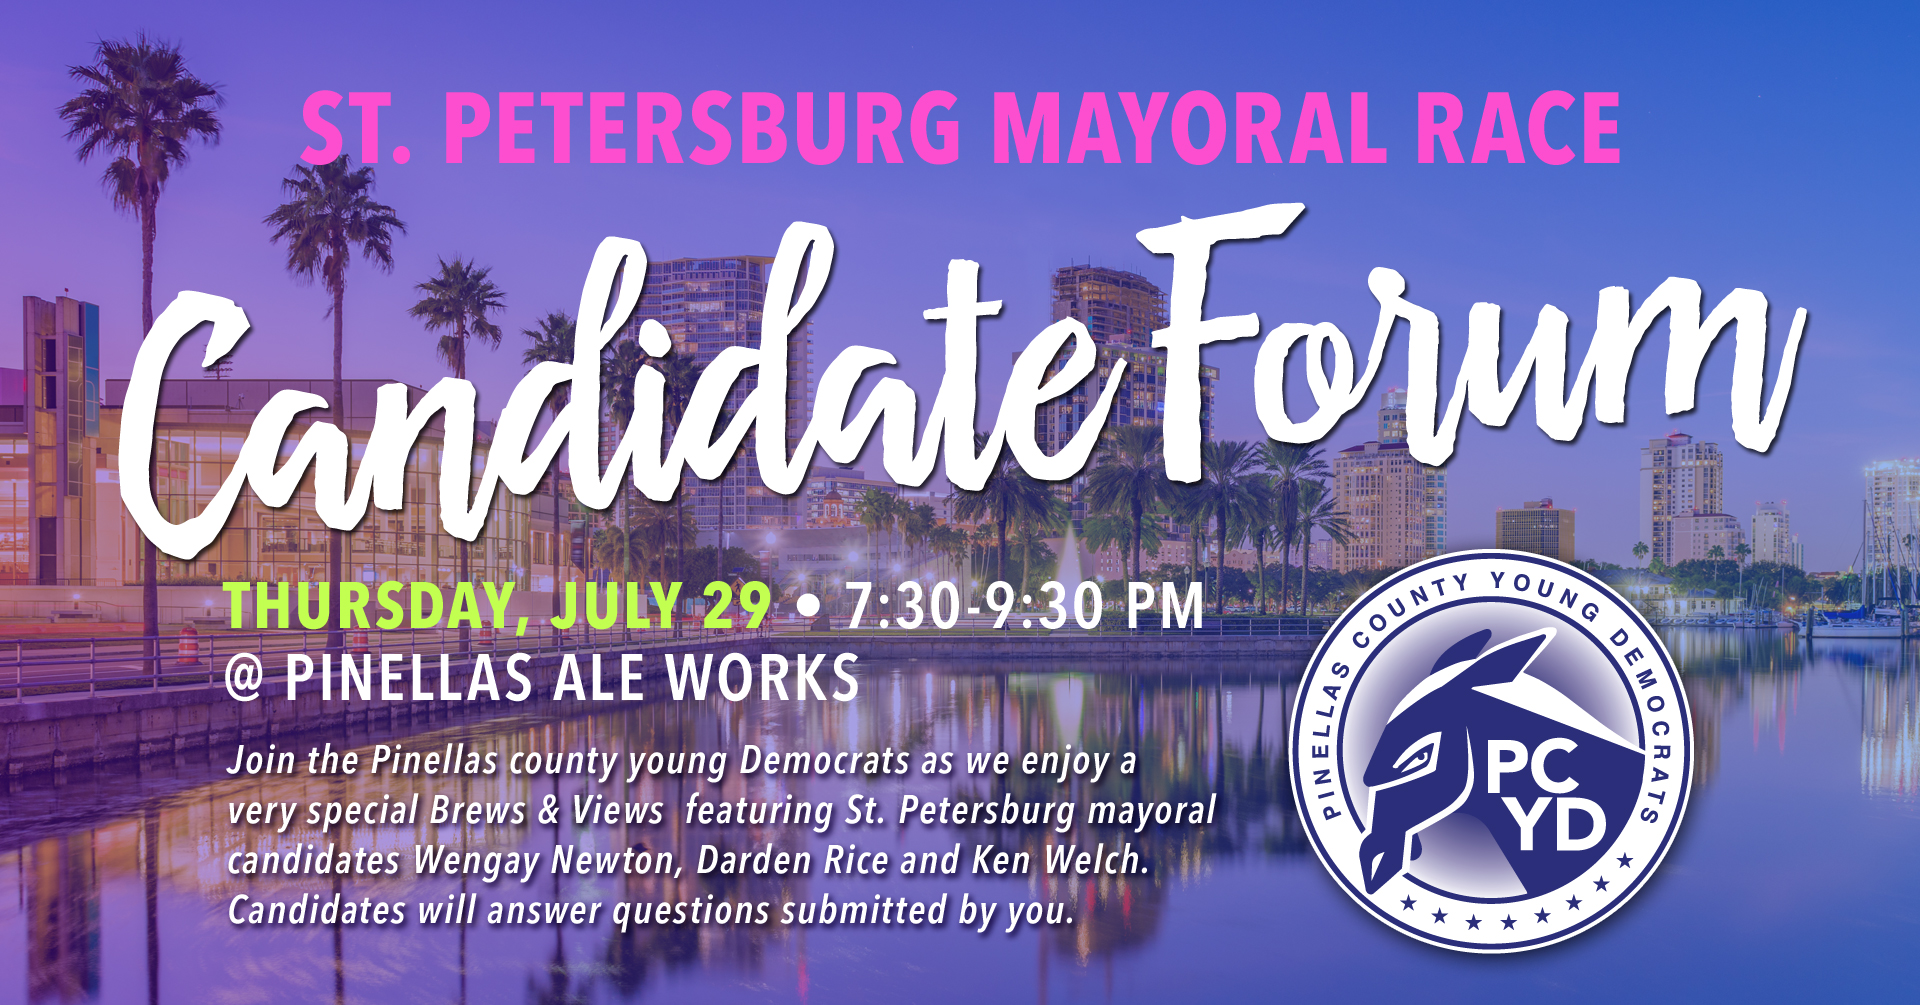 St Petersburg Mayoral Race Candidate Forum